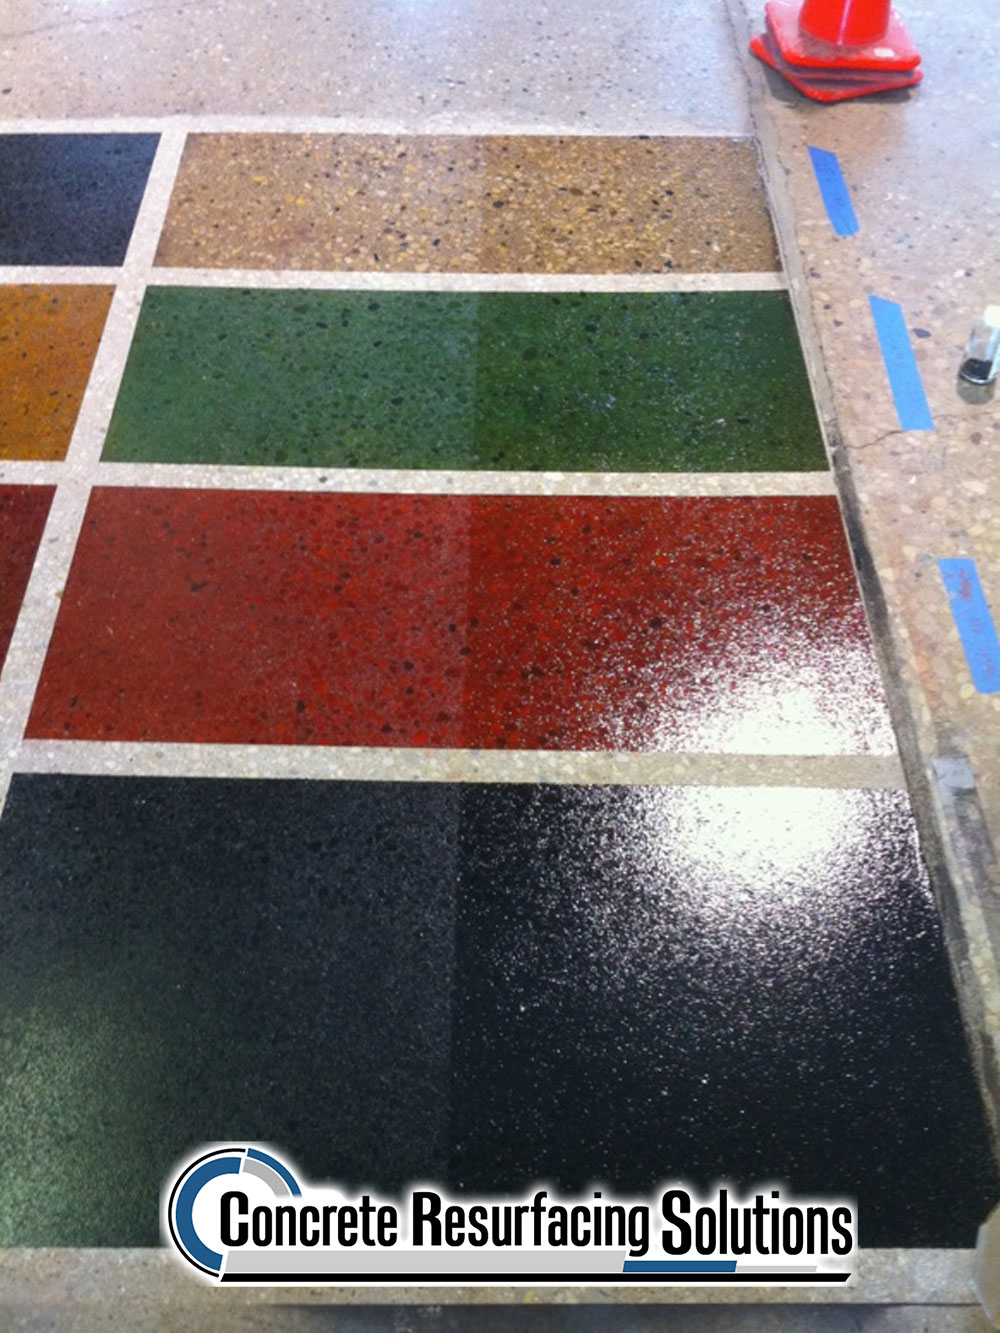 A wide variety of colors for your concrete at Concrete Resurfacing Solutions in Chicago!